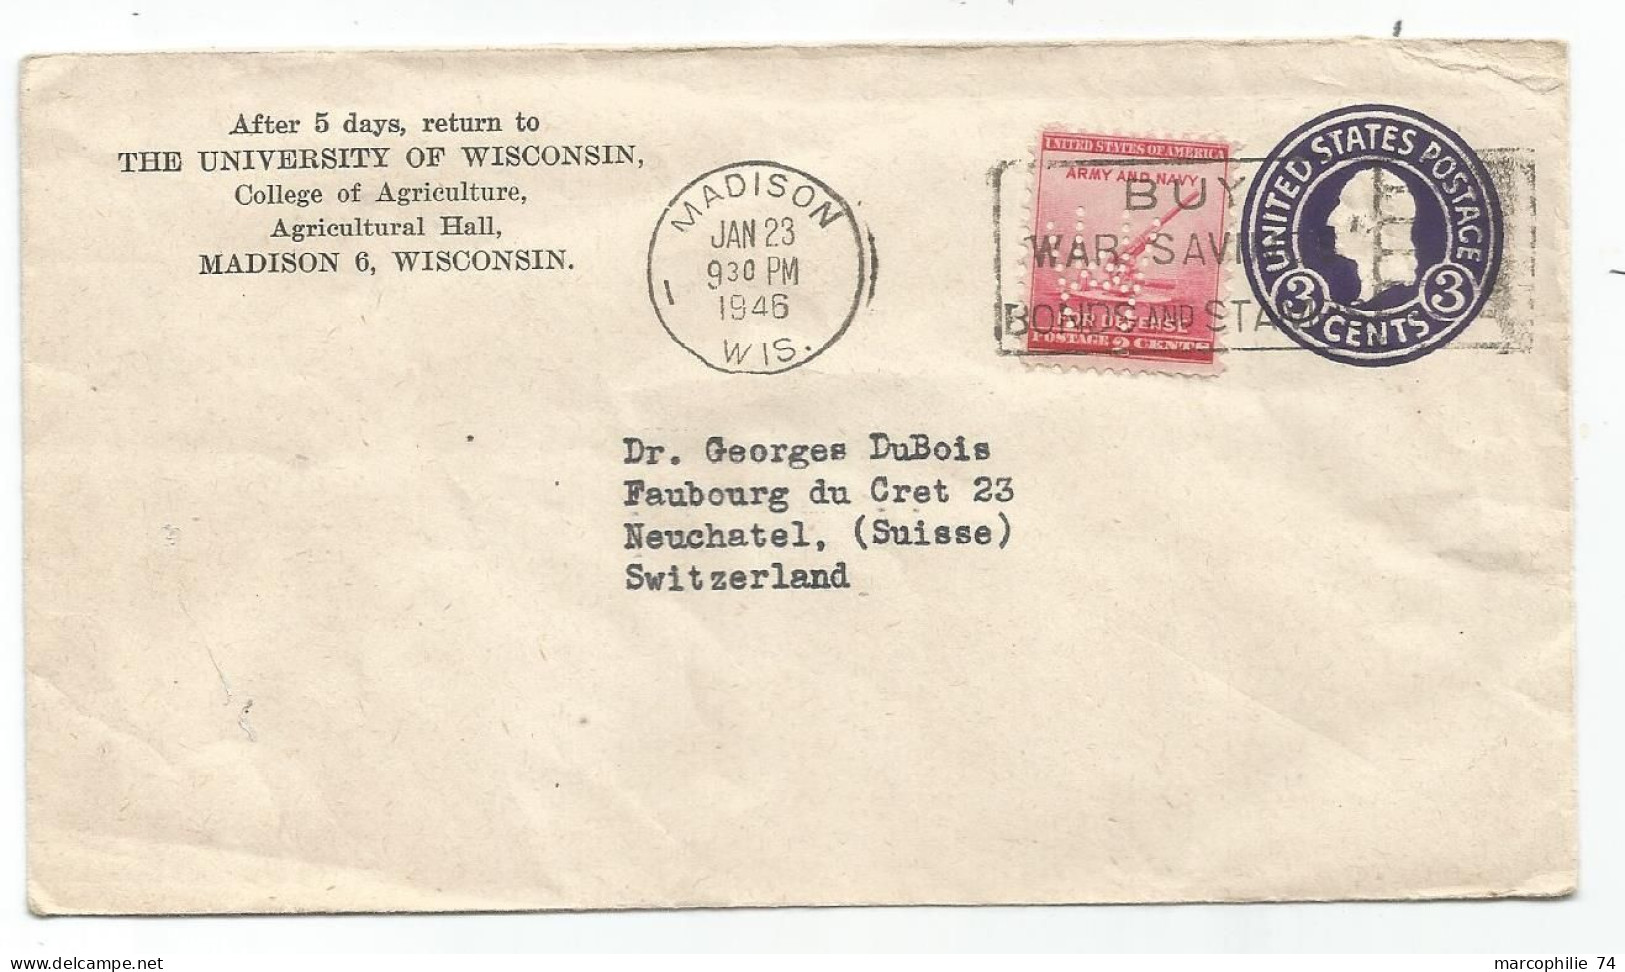 ETATS UNIS ARMY NAVY 2C PERFIN WU SUR ENTIER COVER UNIVERSITY OF WISCONSIN 1946 TO SUISSE - Perfins